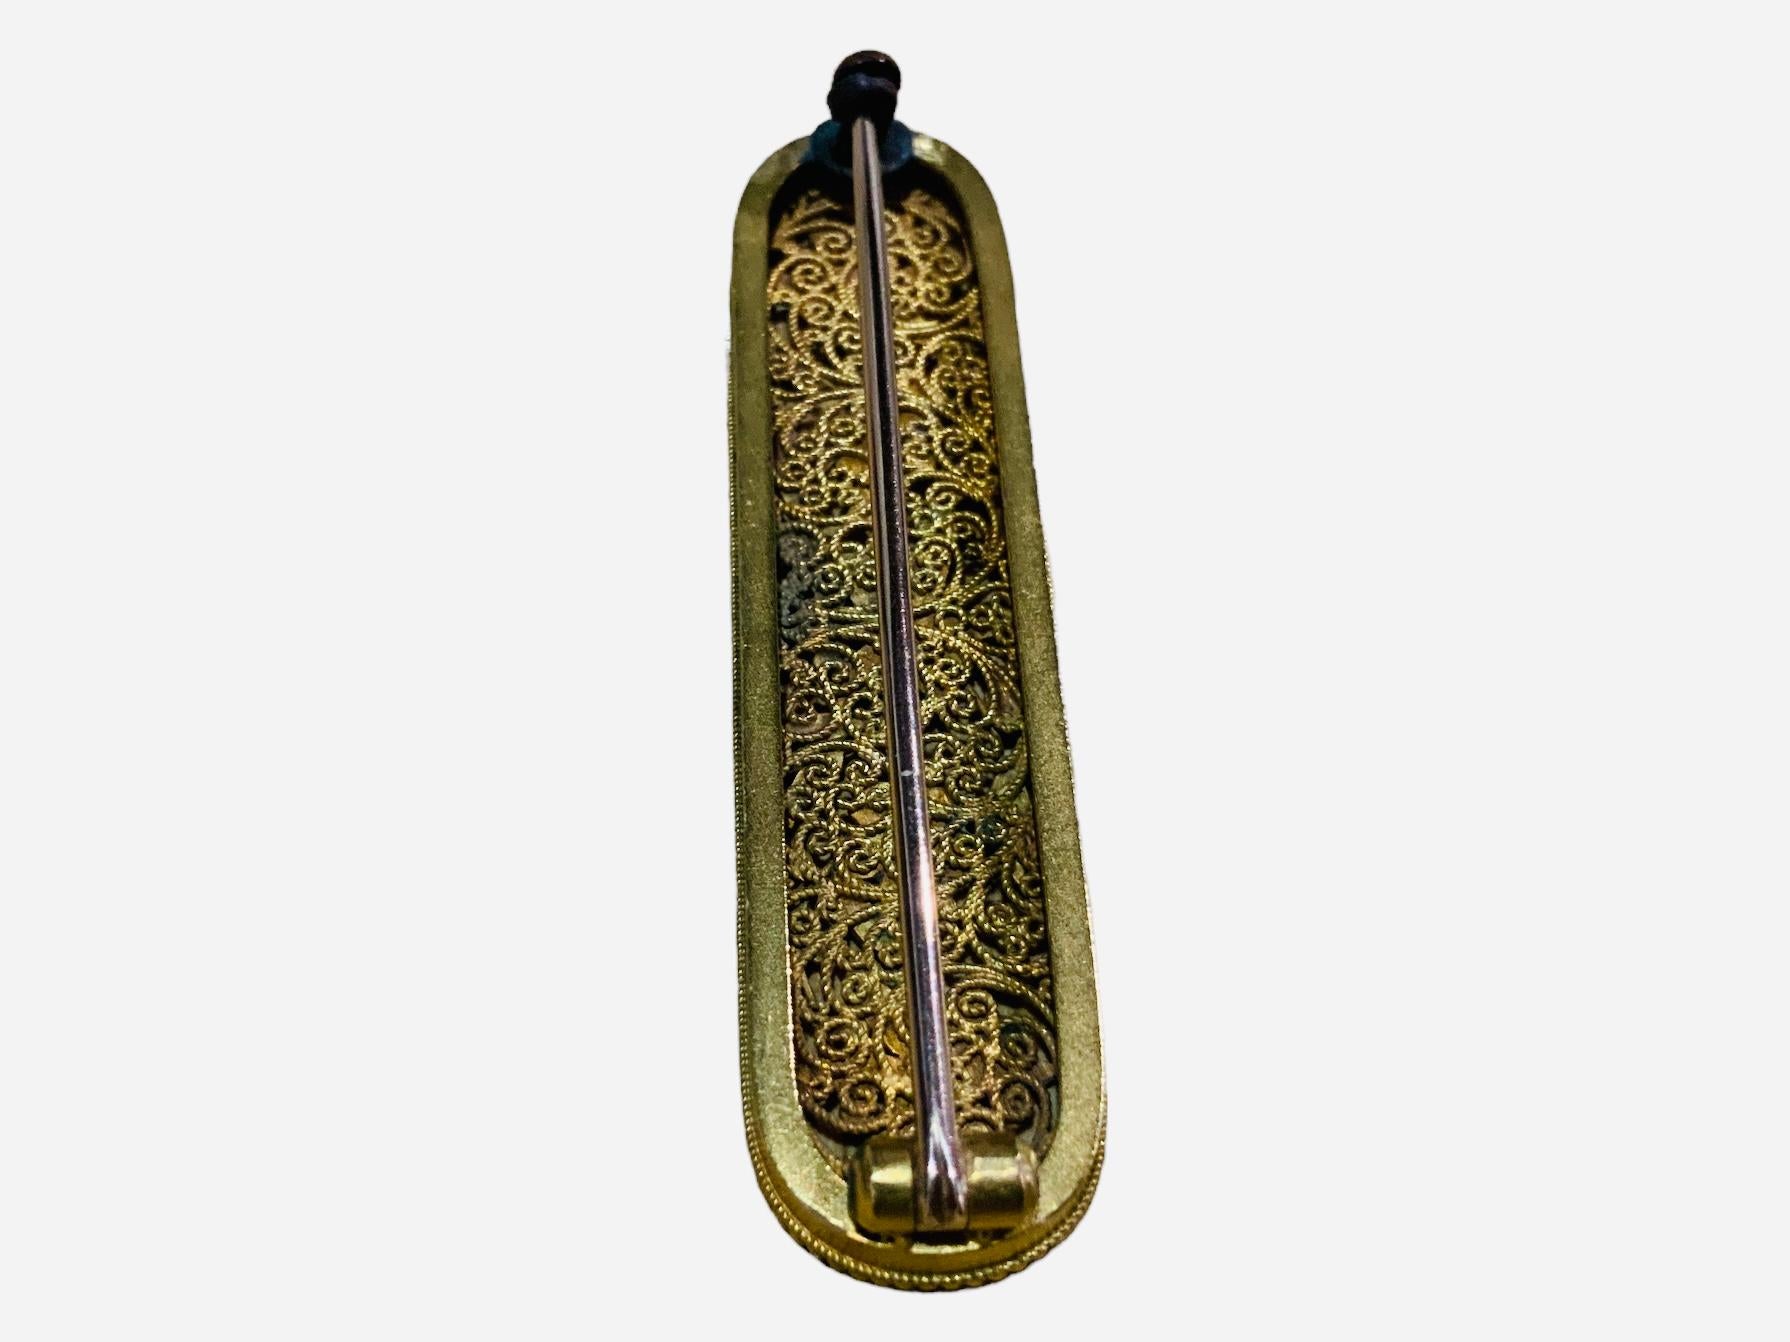 This is an 18K yellow gold enamel floral elongated oval brooch. The brooch is adorned with a colorful mixed of flowers with foliages in the center. Its border is decorated with gold beads. In the back, the brooch closes with a C-clasp.